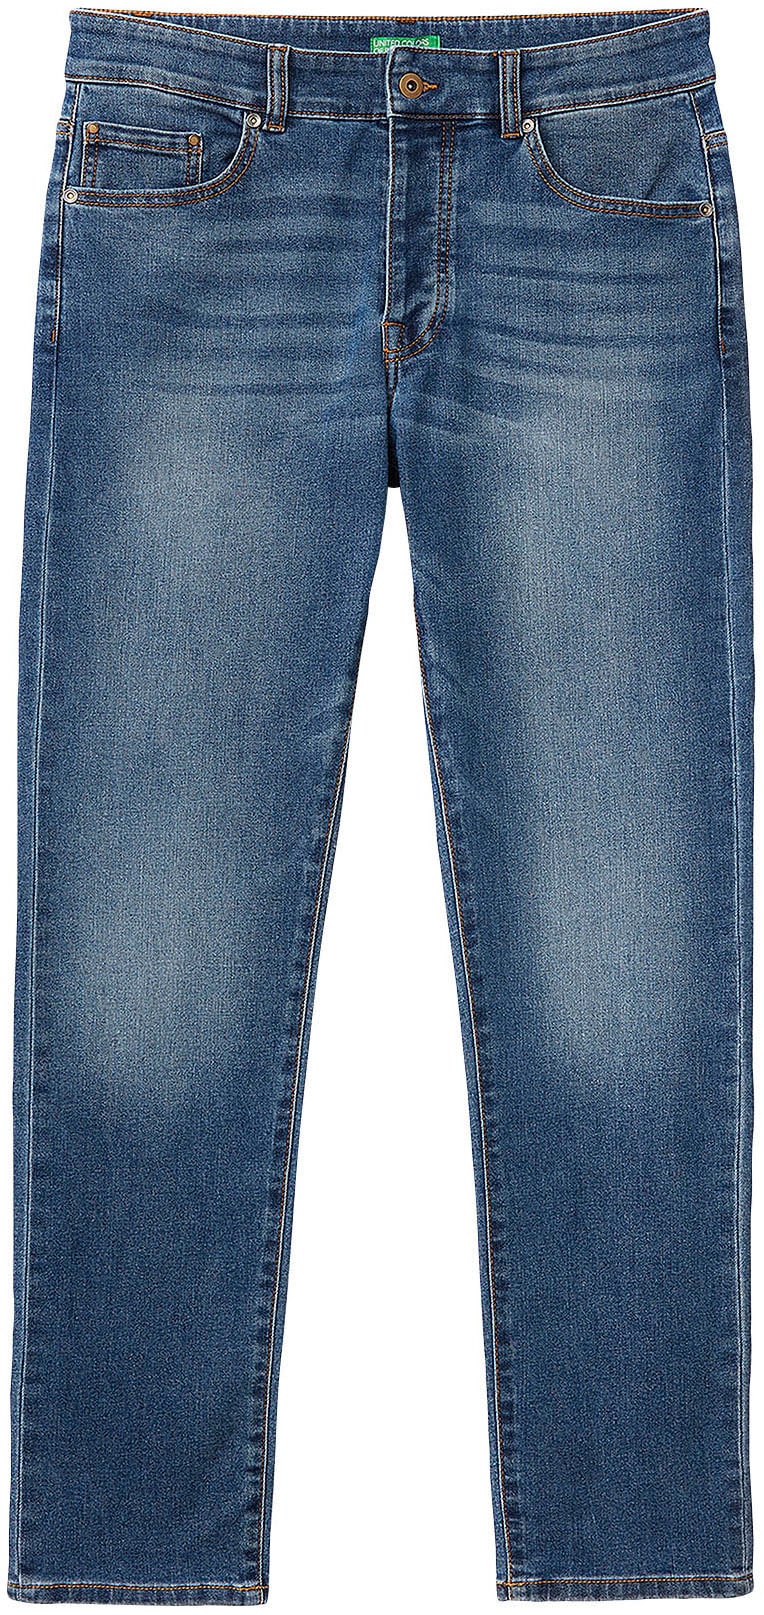 United Colors of Benetton Stretch-Jeans, im 5-Pocket-Look von United Colors of Benetton